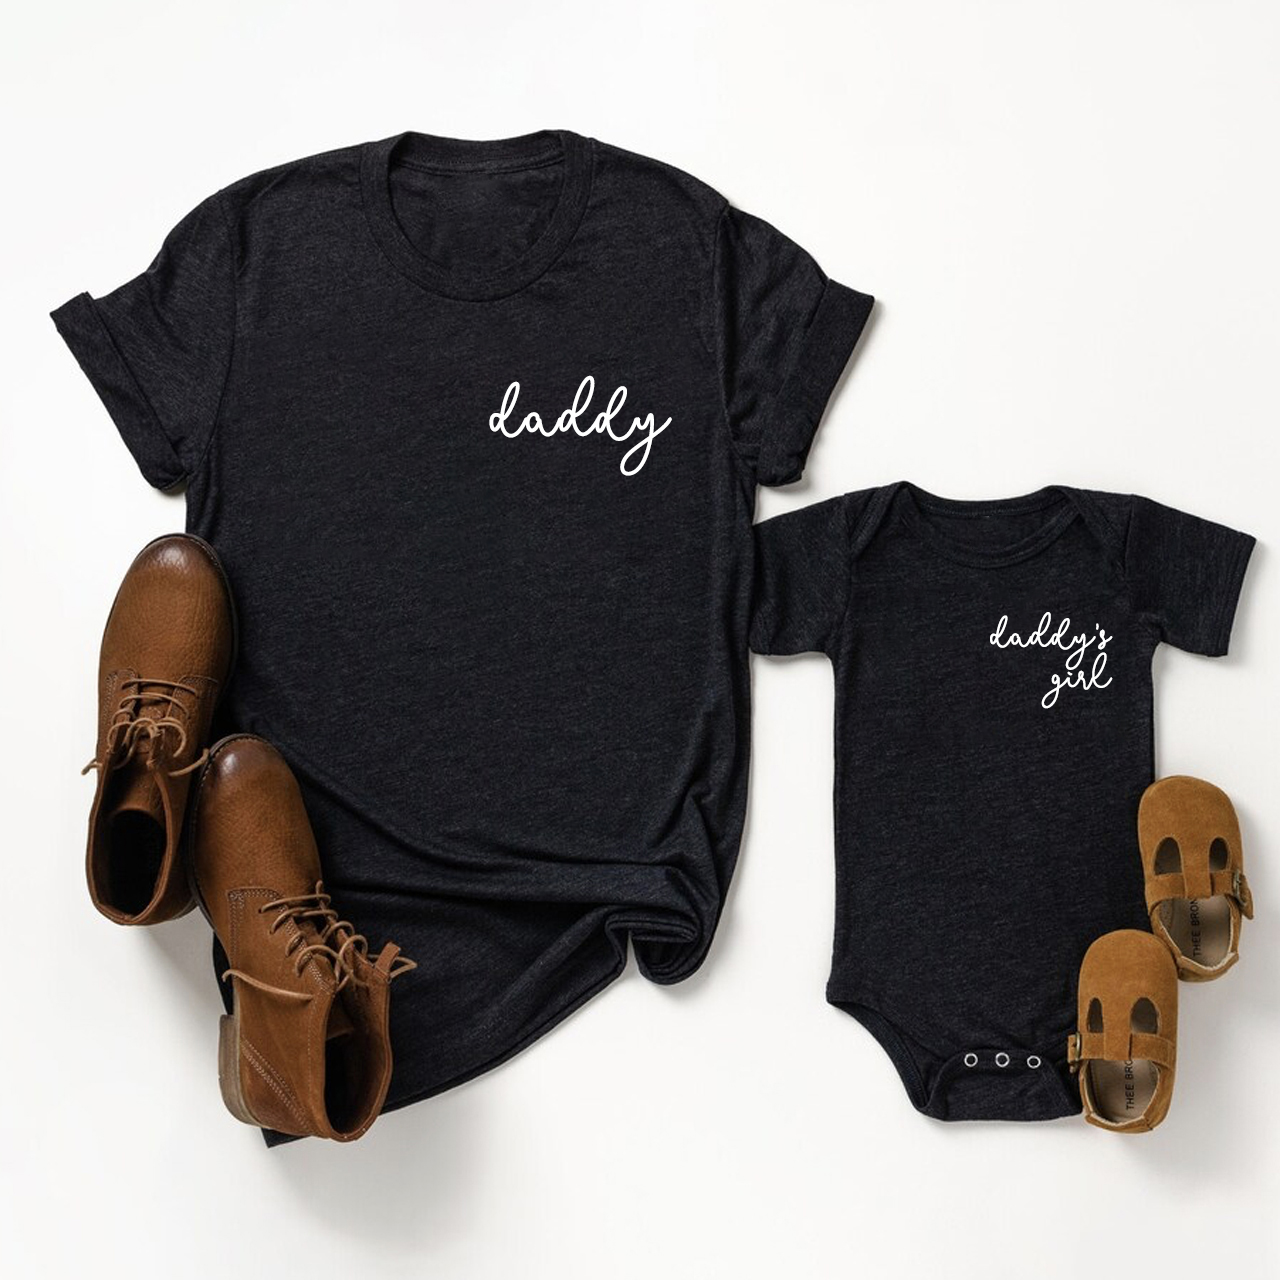 The Best Gift Matching Tees For Daddy & Daddy's Boy Girl